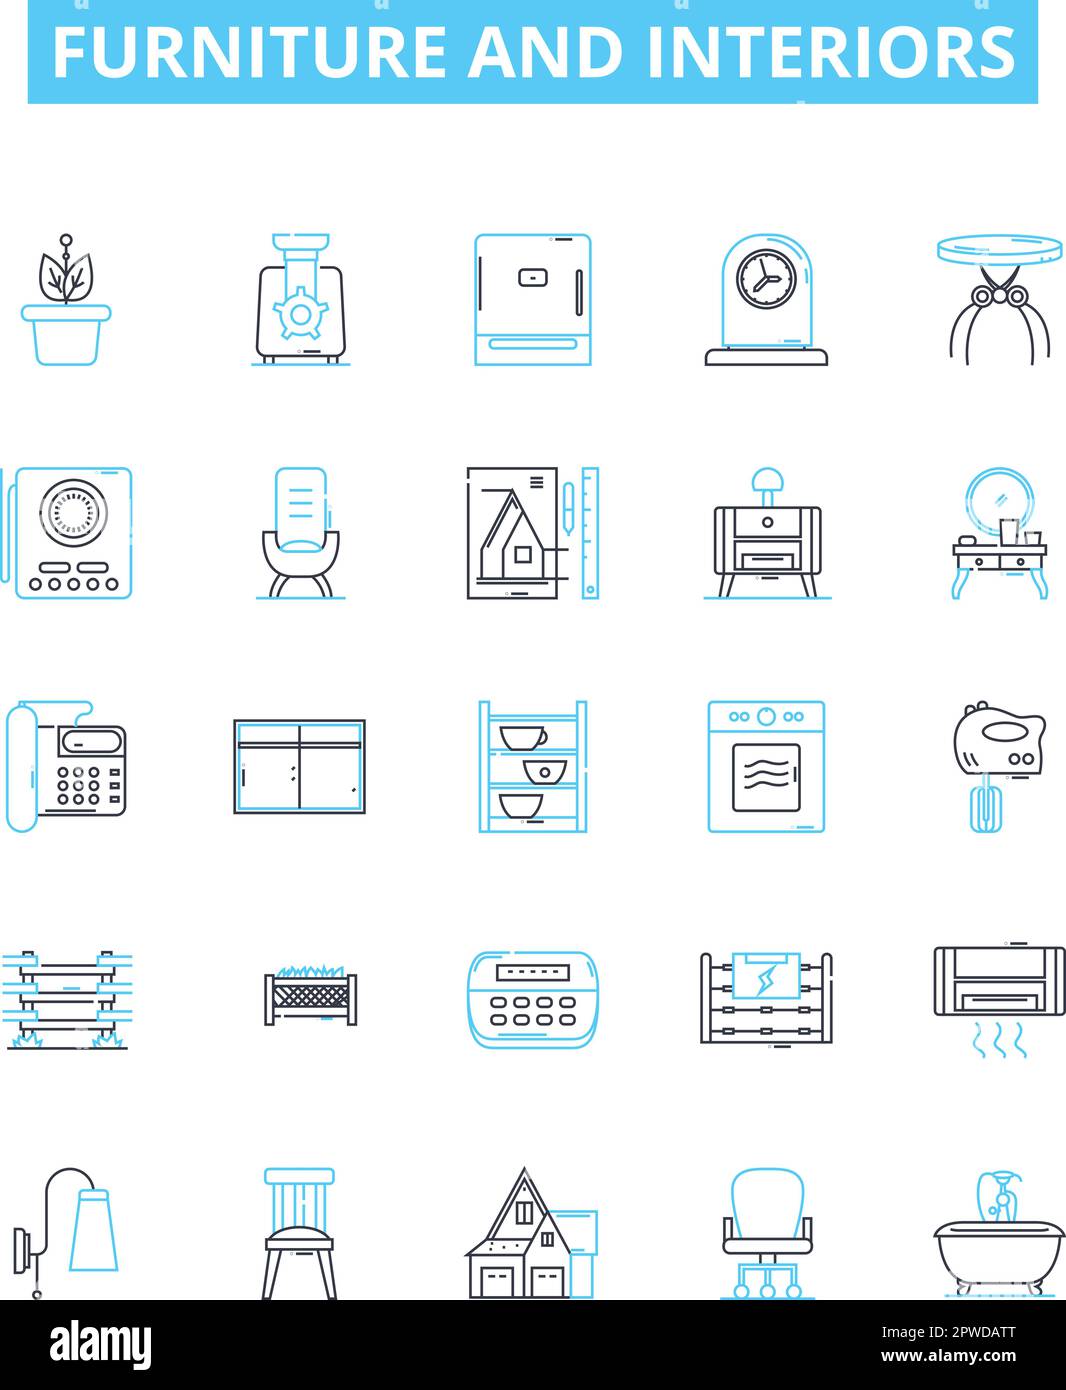 Furniture and interiors vector line icons set. Furniture, Interiors, Sofas, Chairs, Tables, Desks, Beds illustration outline concept symbols and signs Stock Vector